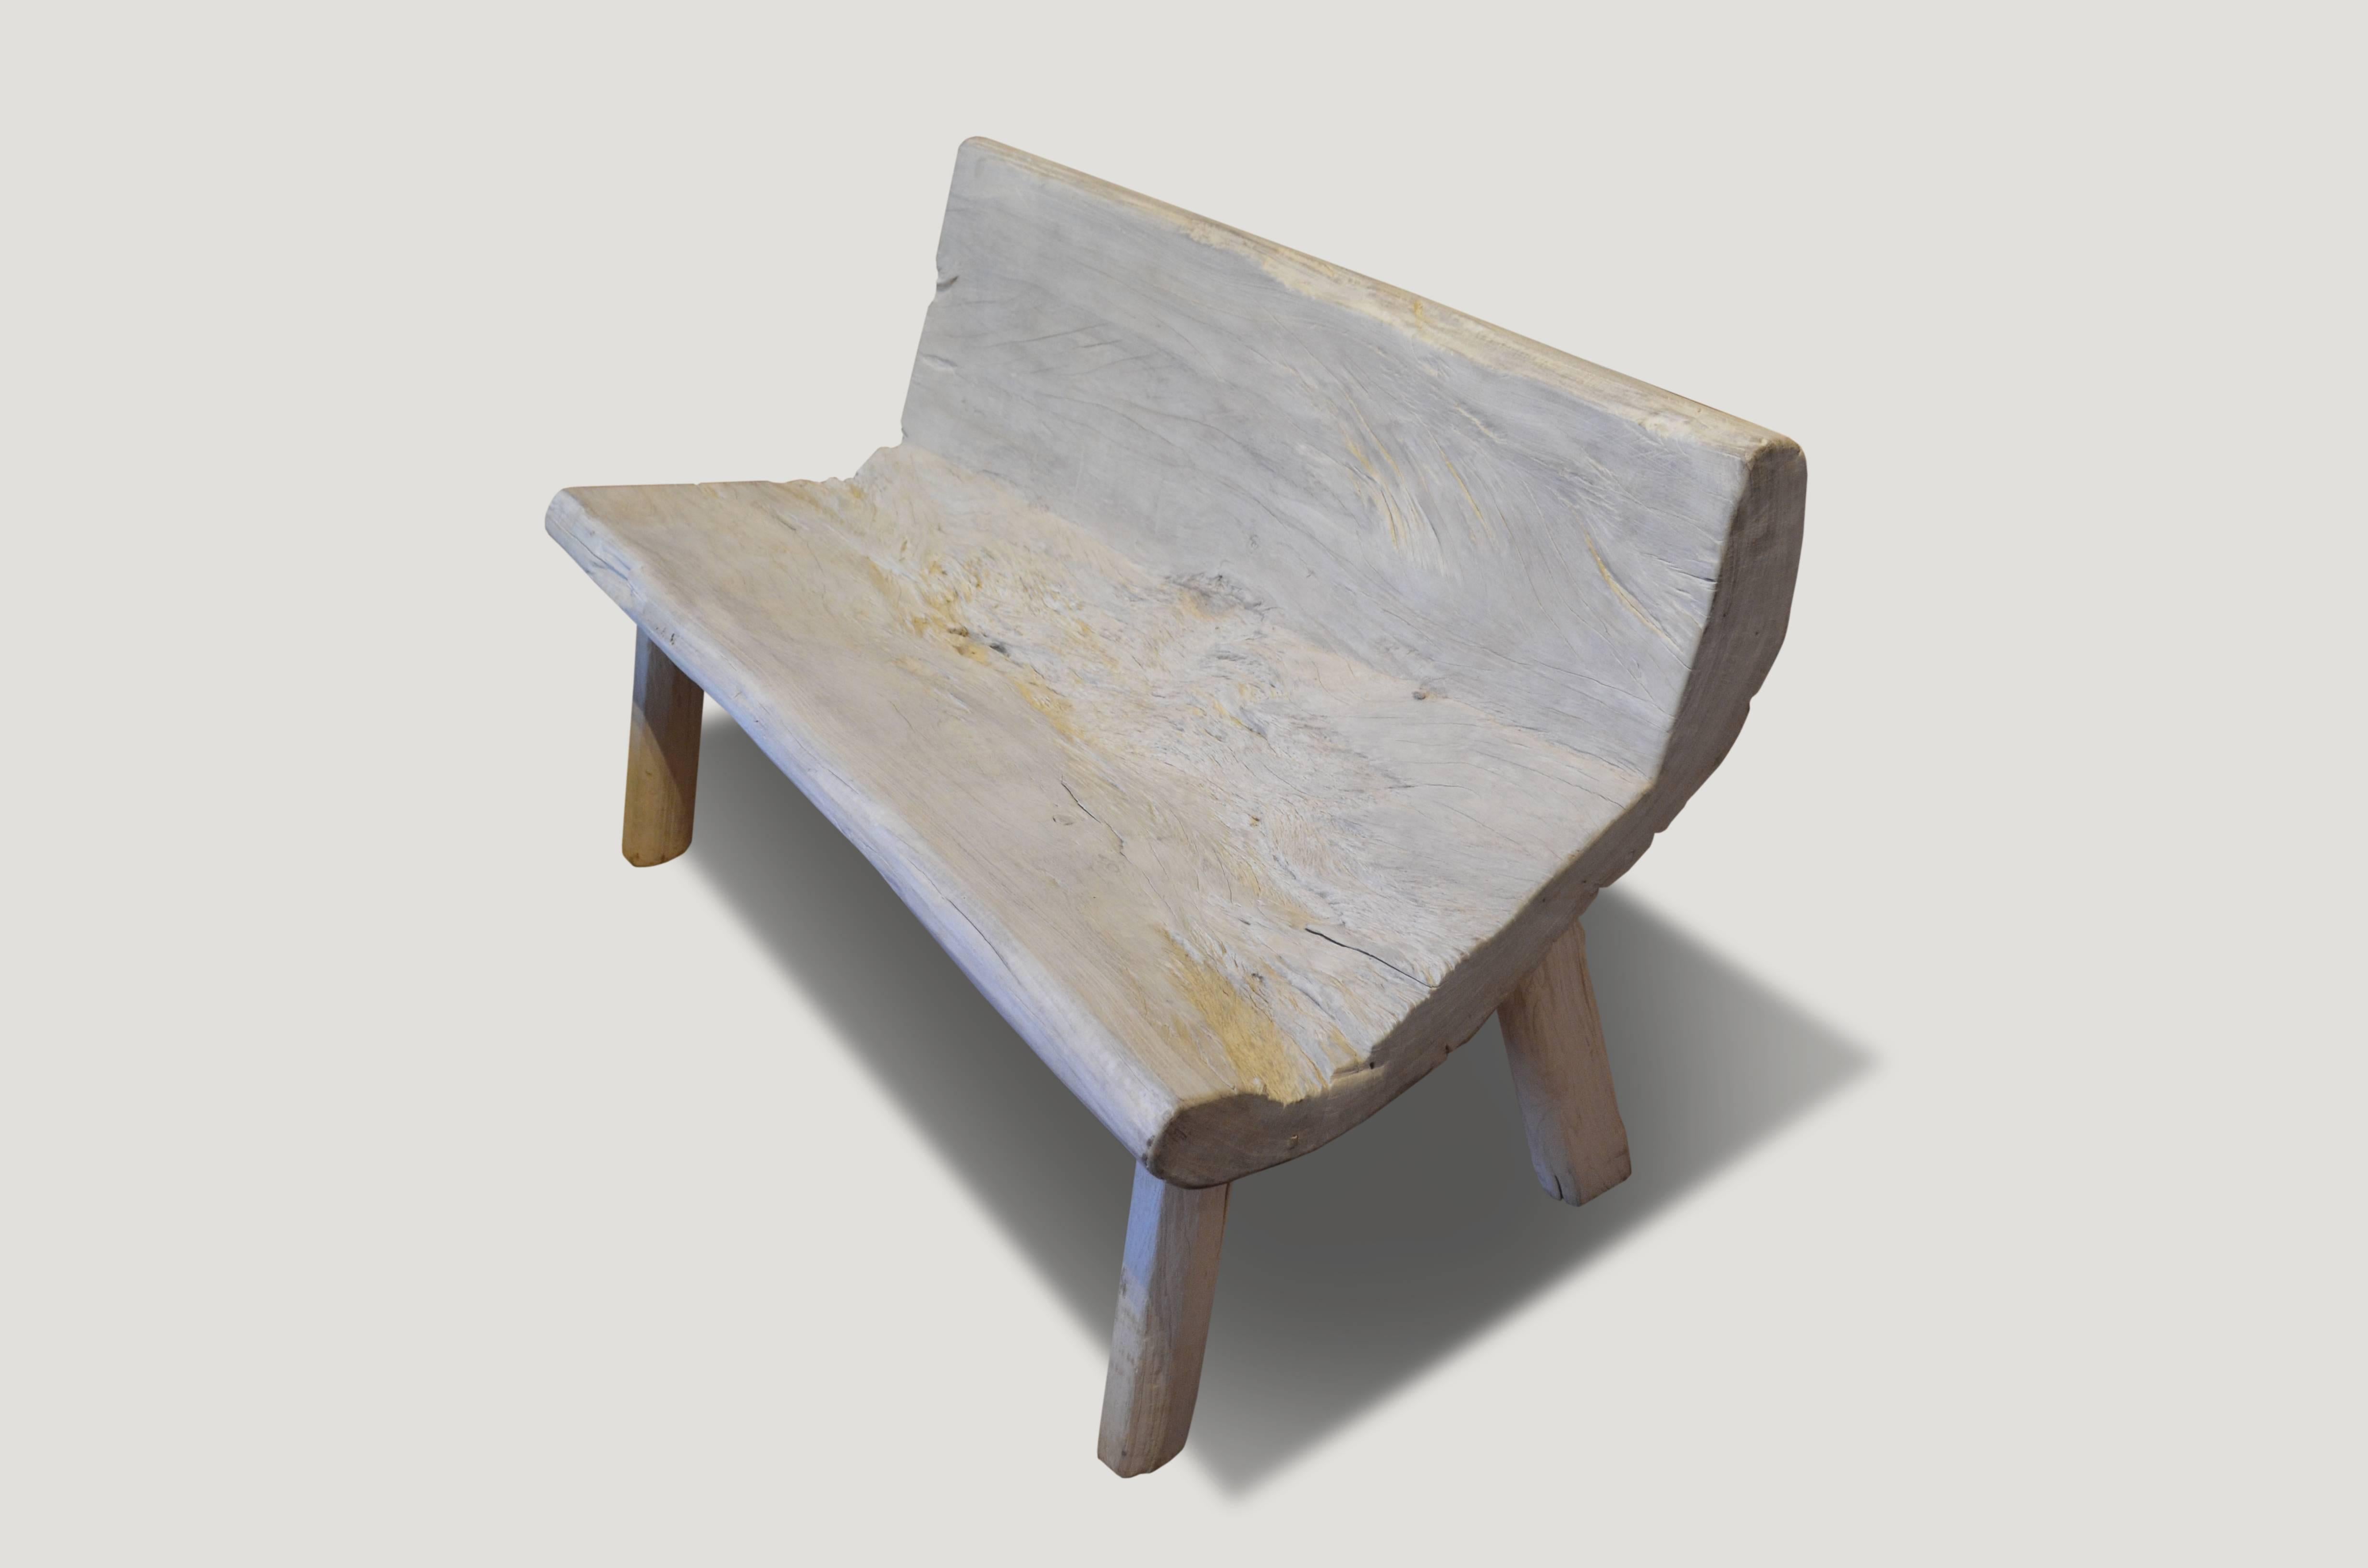 Hand-carved top from a single reclaimed teak wood root. Perfect for inside or outside living. Organic is the new modern.

The St. Barts collection features an exciting new line of organic white wash and natural weathered teak furniture. The